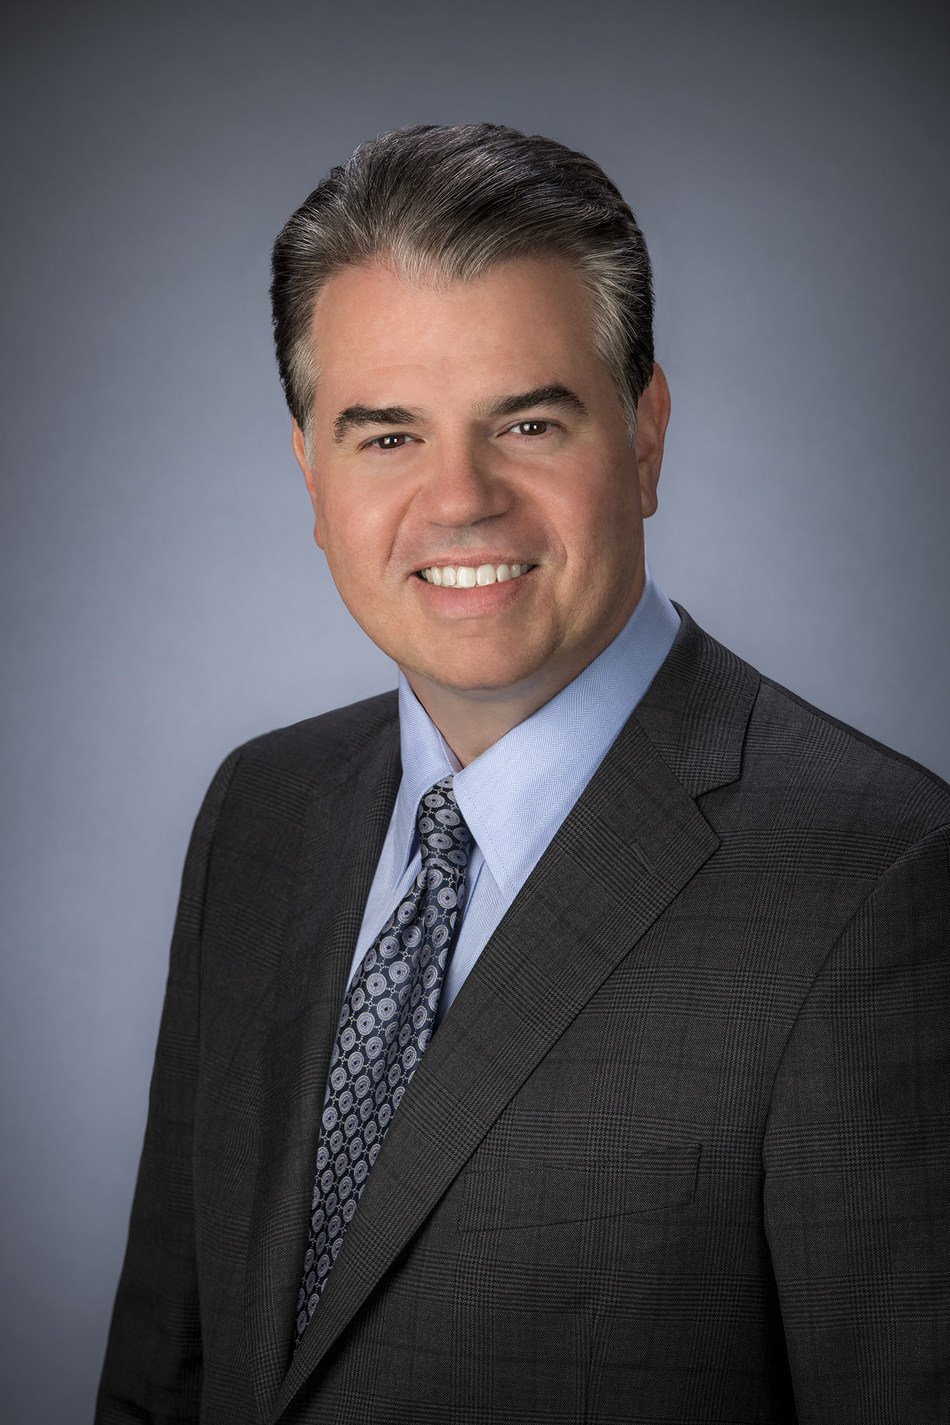 Cigna has named Christopher DeRosa to lead its national accounts business.